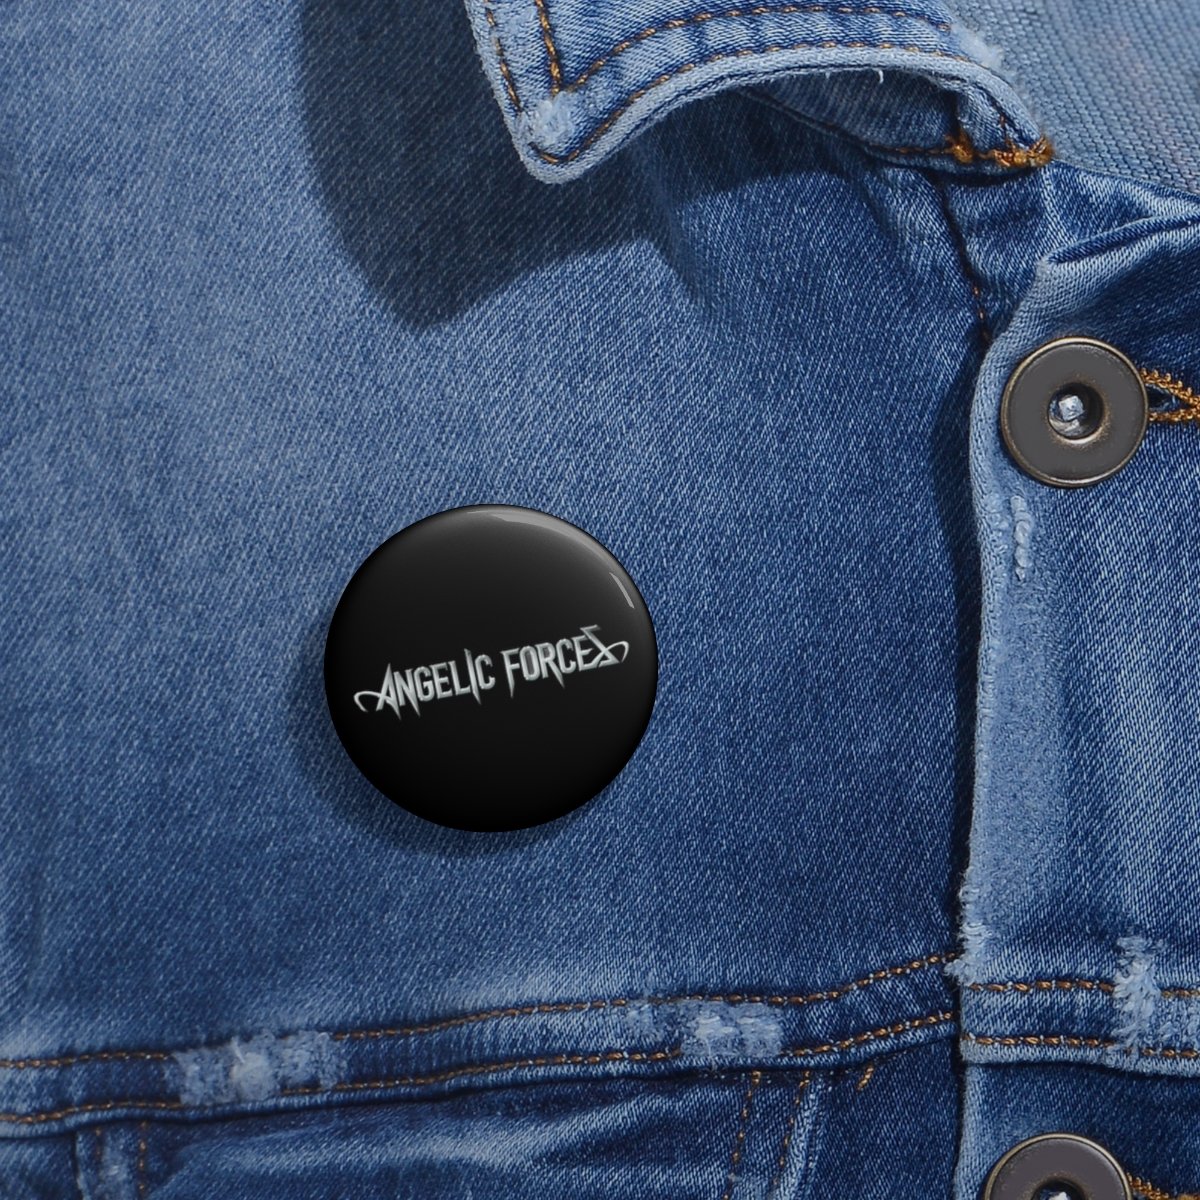 Angelic Forces New Logo Pin Buttons